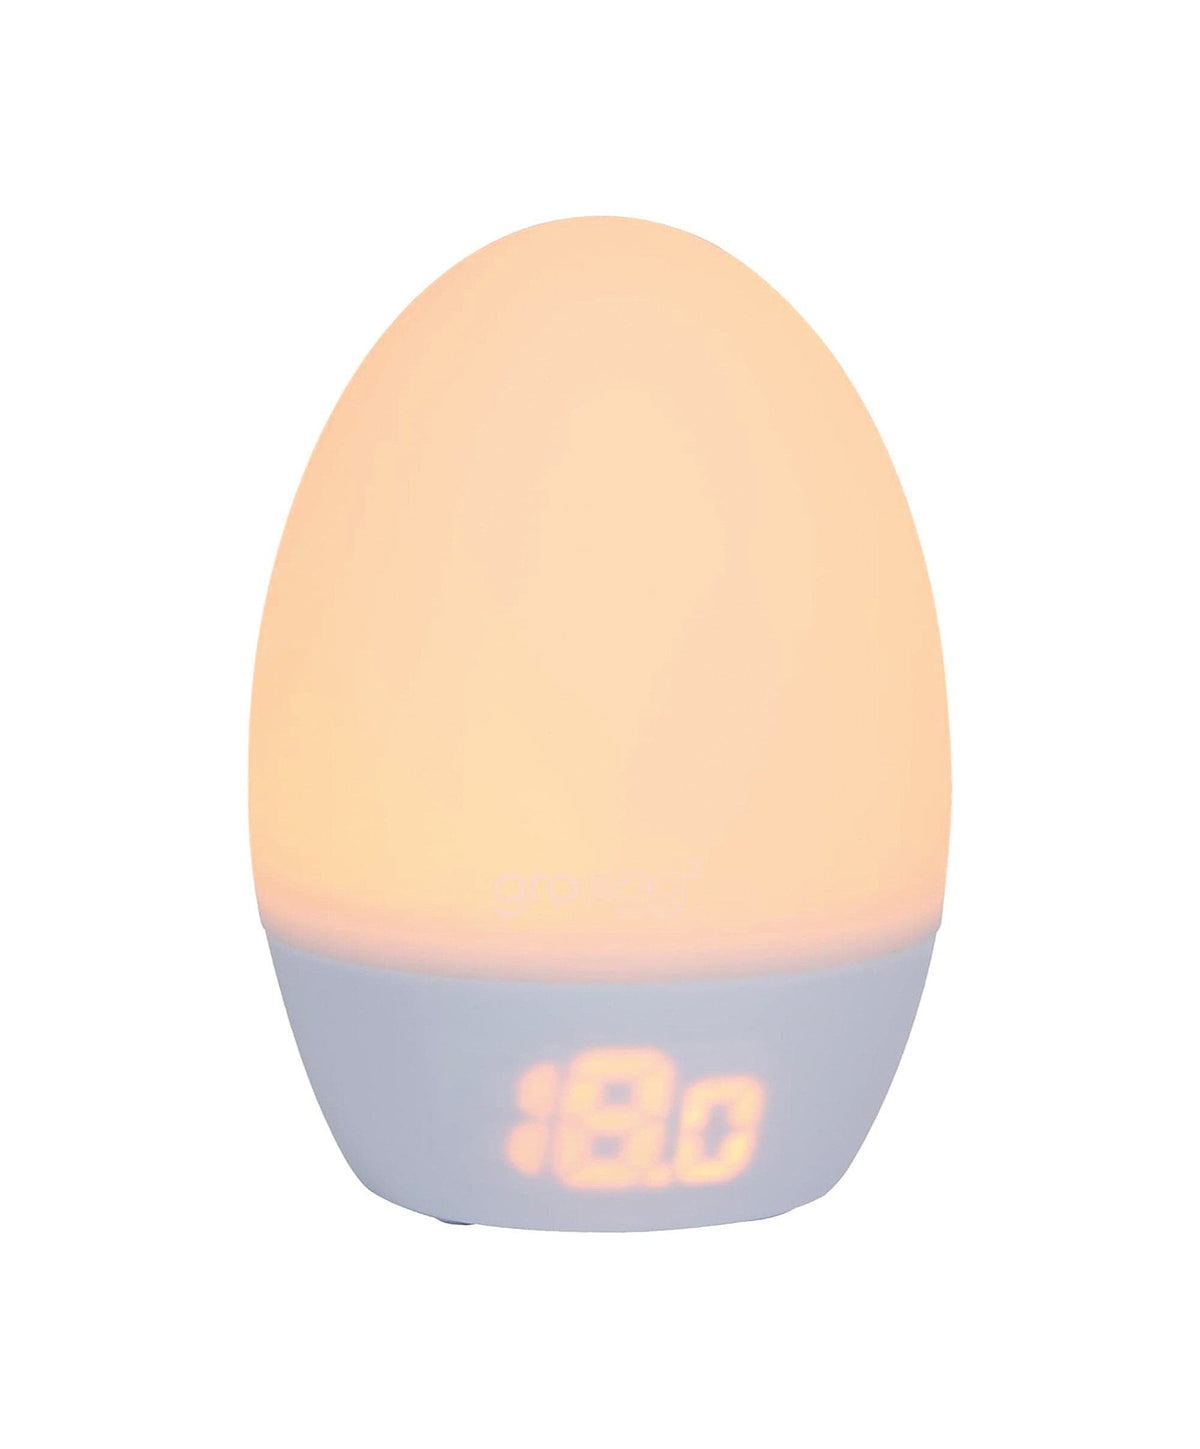 Tommee Tippee Gro Egg 2 Nursery Room Thermometer & Night Light - White